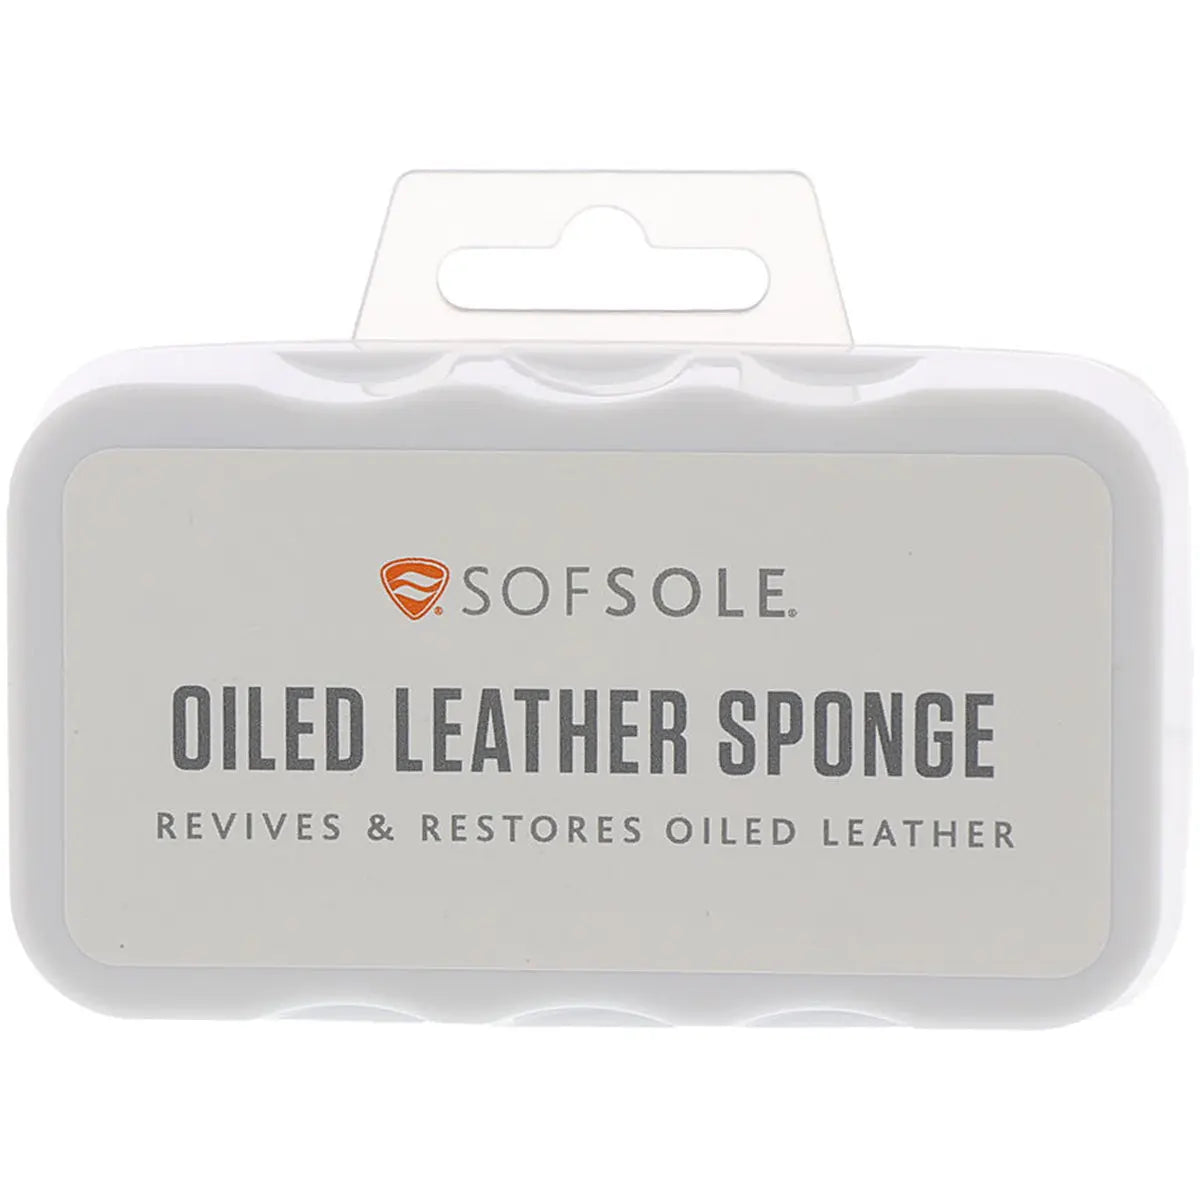 Sof Sole Oiled Leather Sponge SofSole